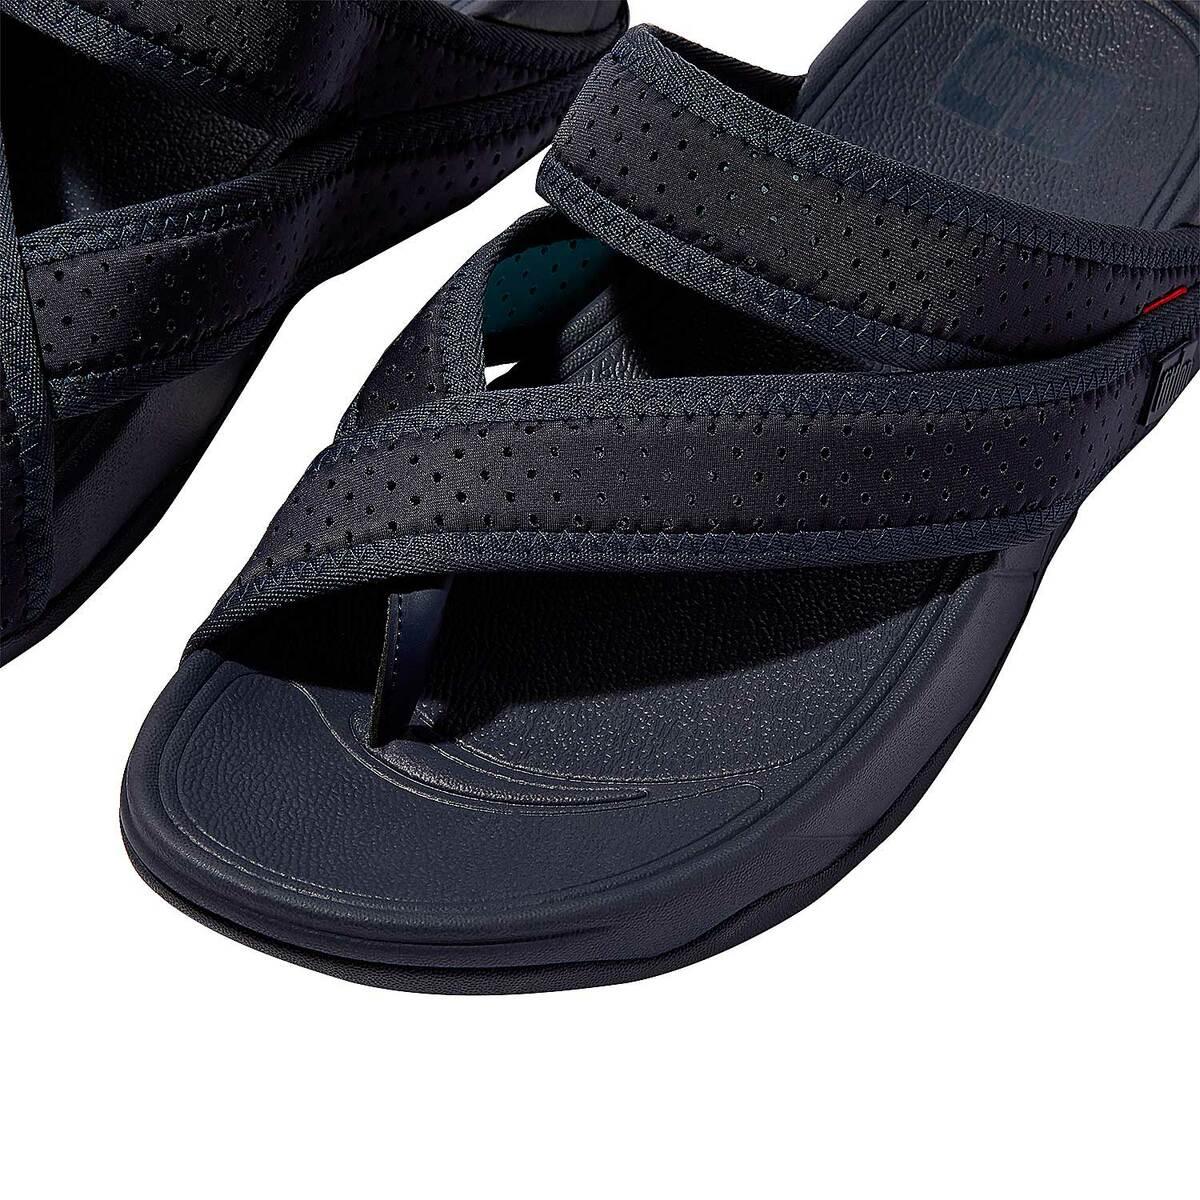 Discover more than 203 men’s water resistant sandals